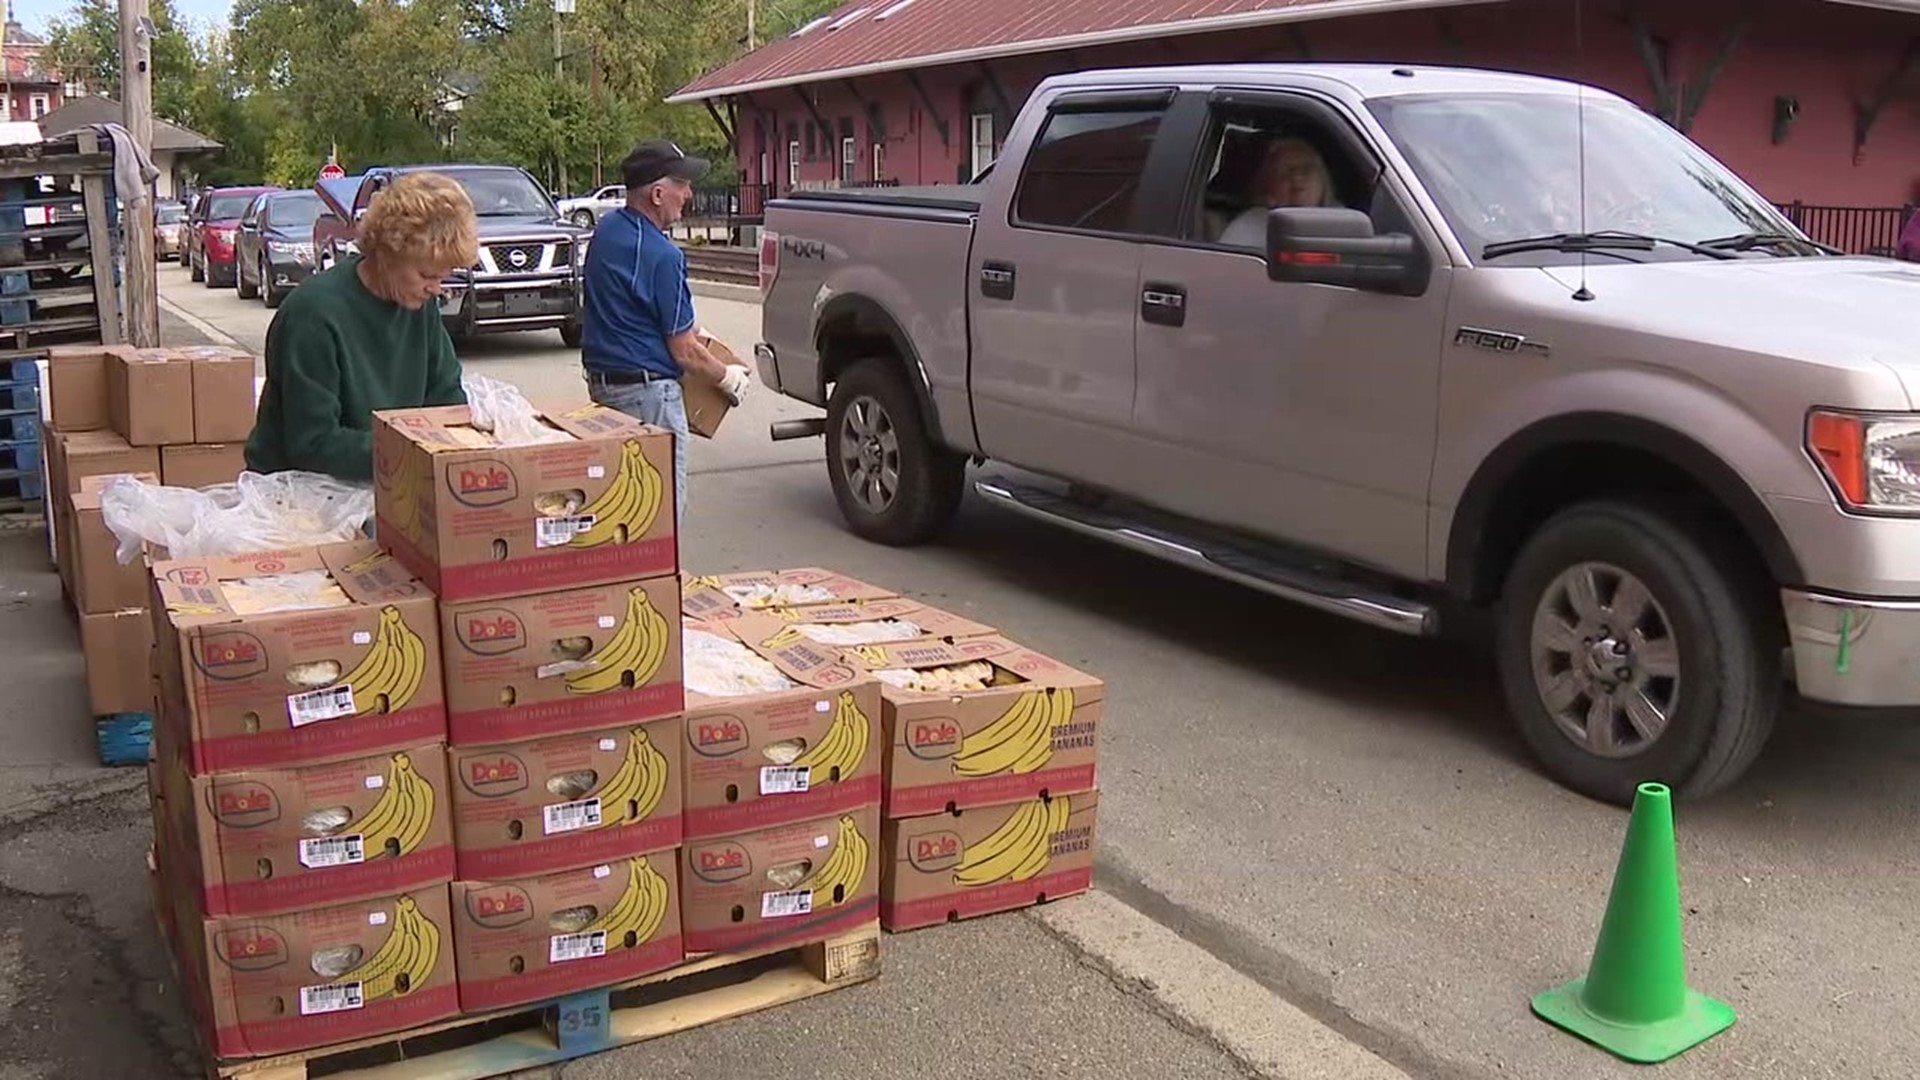 Newswatch 16's Chris Keating stopped by the distribution. He spoke with folks who say this food goes a long way.